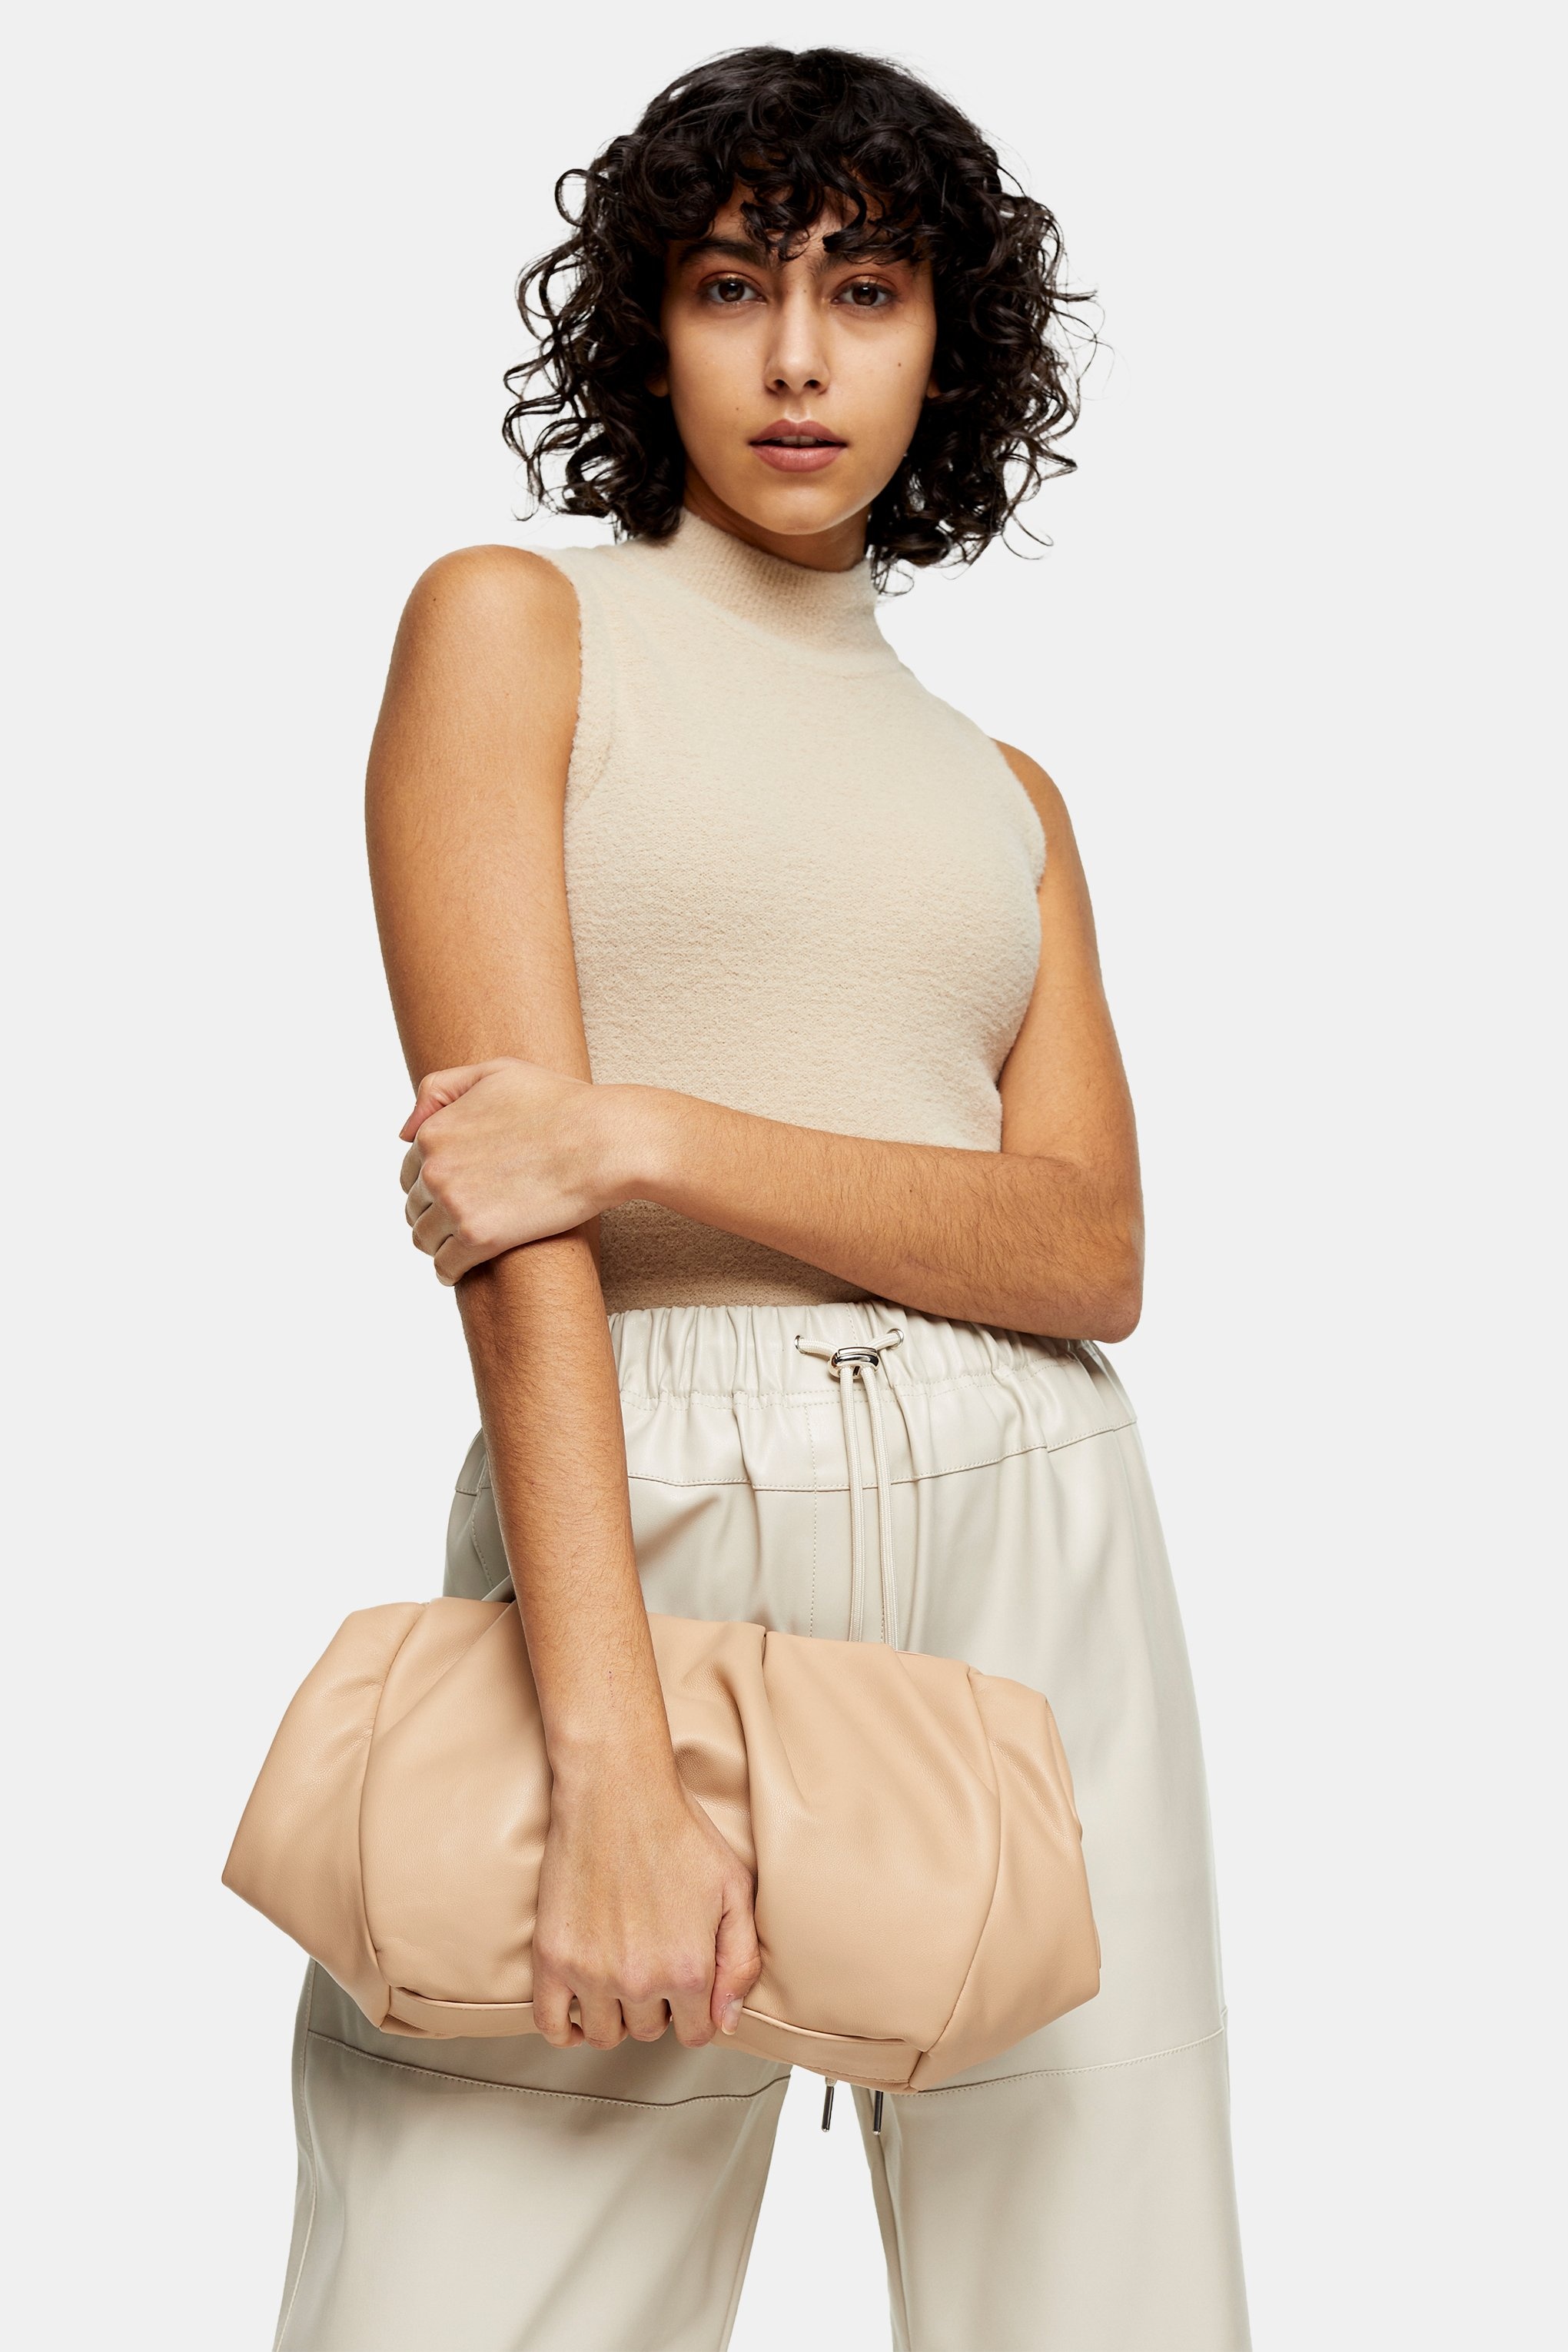 The Slouchy Handbag Trend That We Love And Gonna See Everywhere Next Year